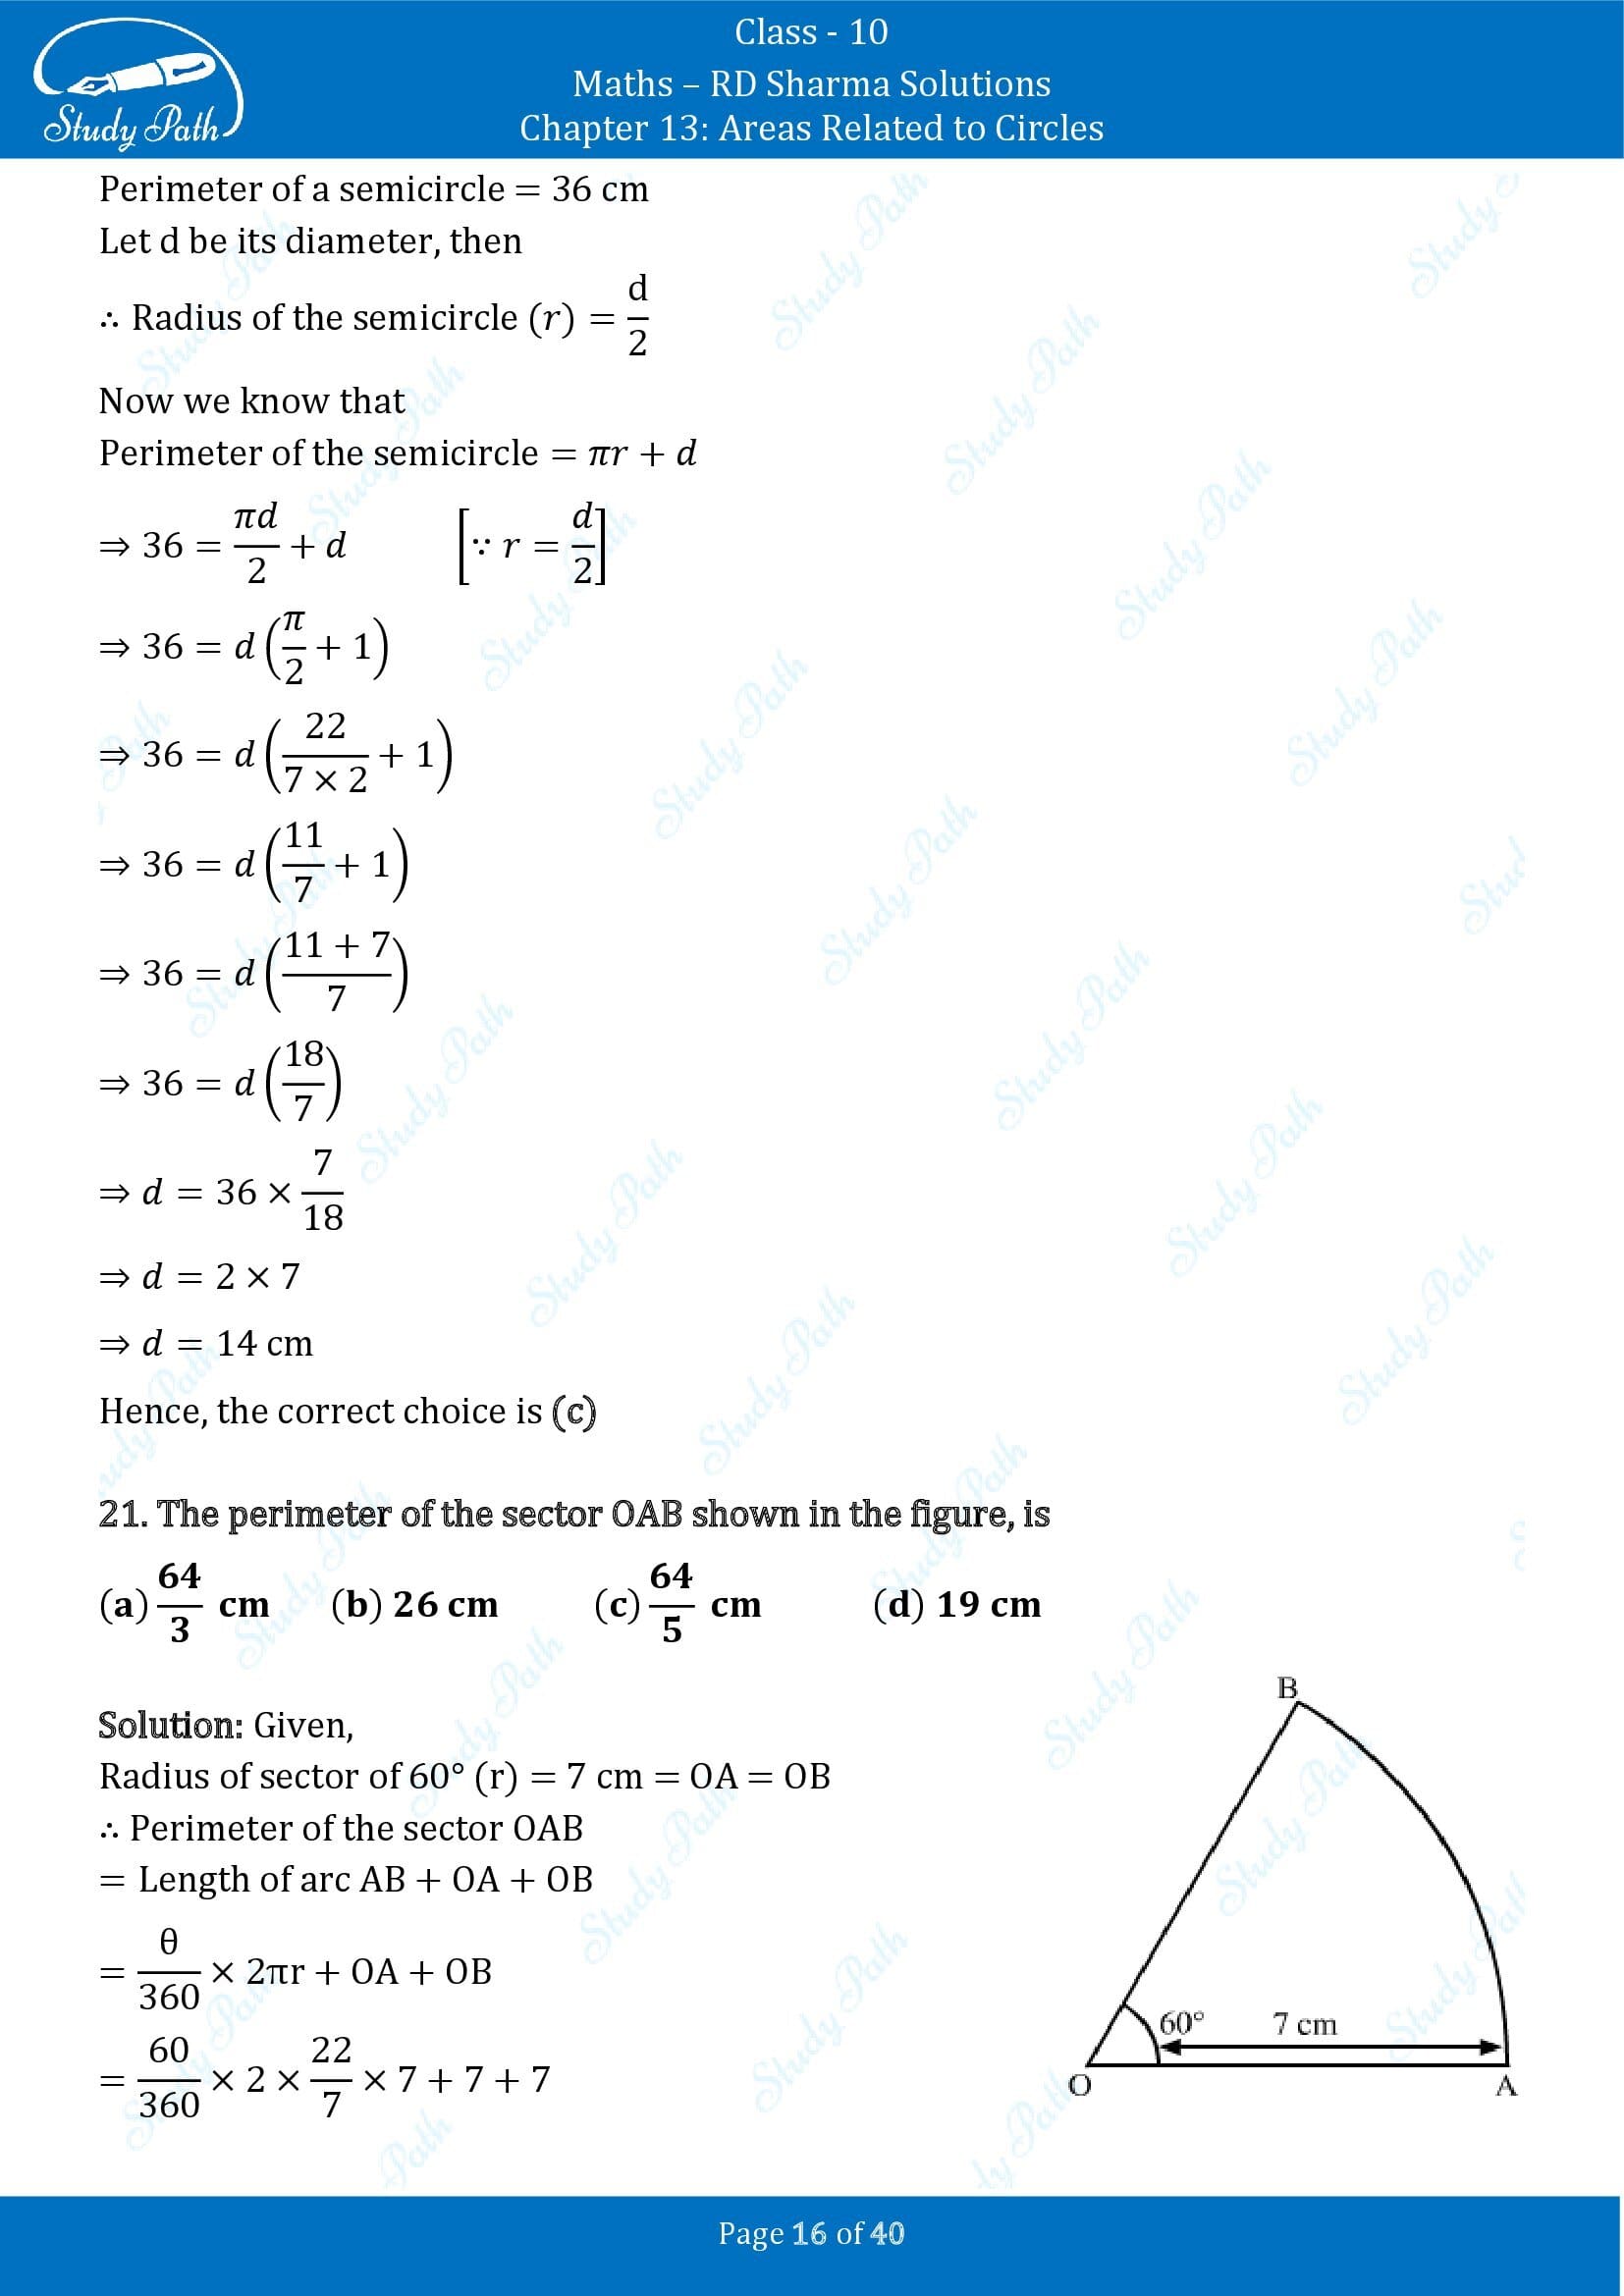 RD Sharma Solutions Class 10 Chapter 13 Areas Related to Circles Multiple Choice Question MCQs 00016